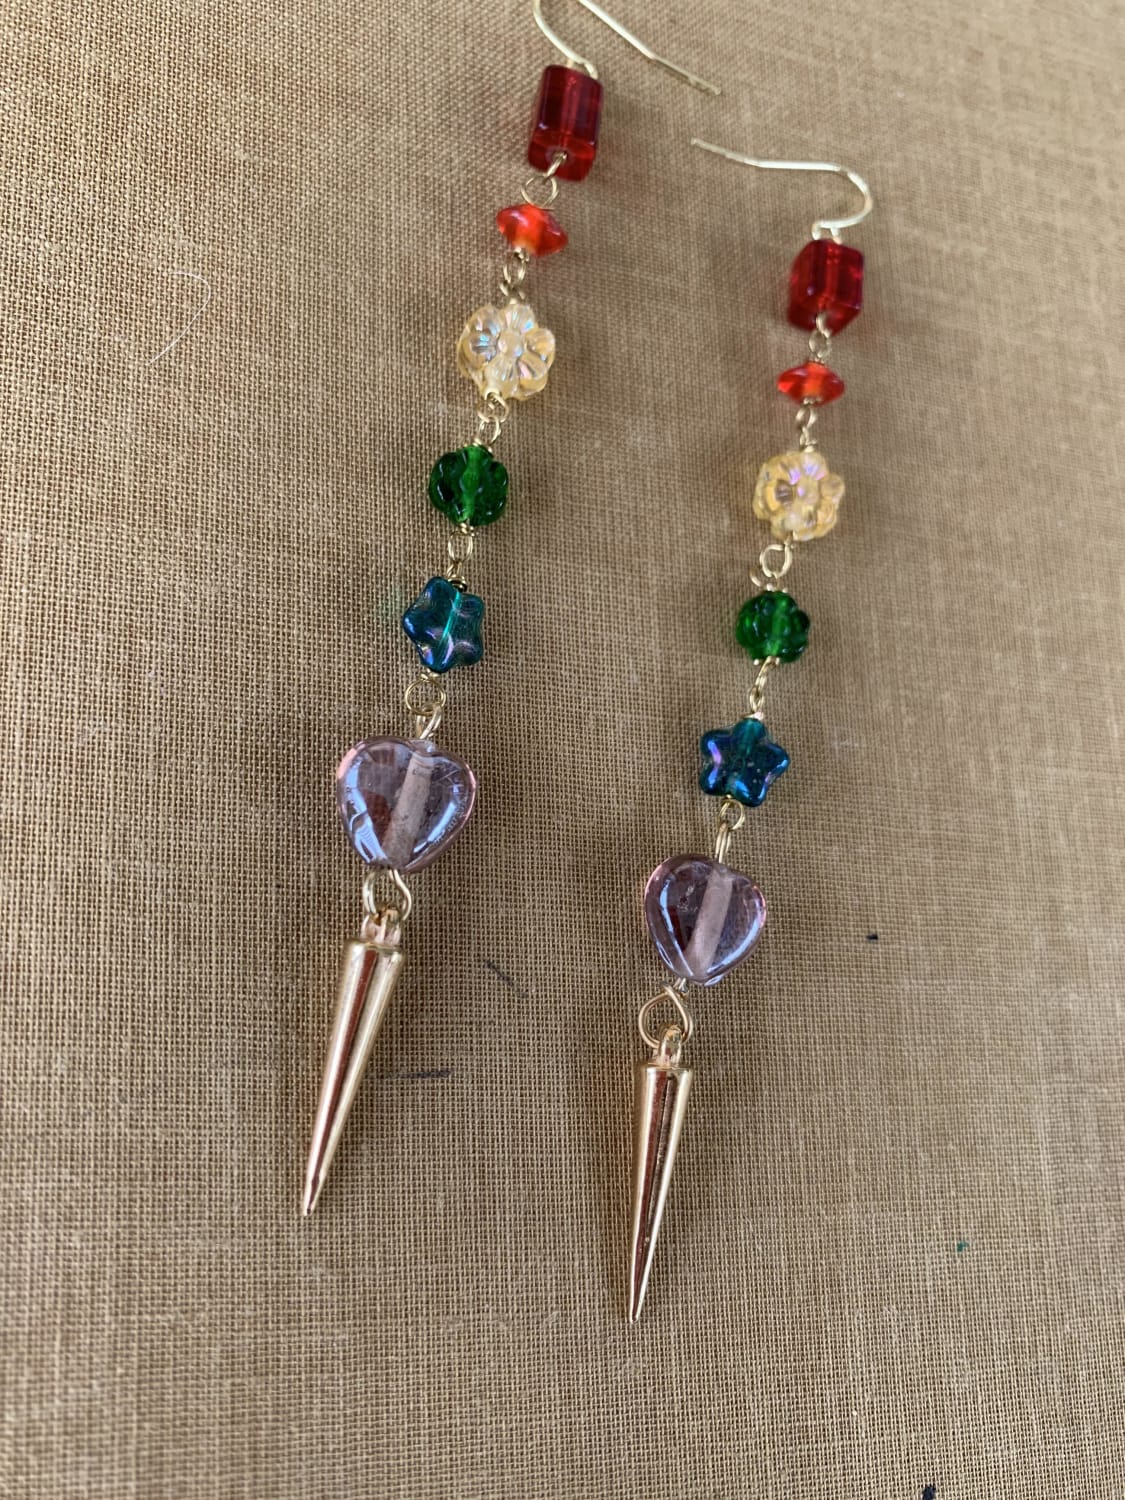 Rainbow earrings made with my grandmothers vintage beads!